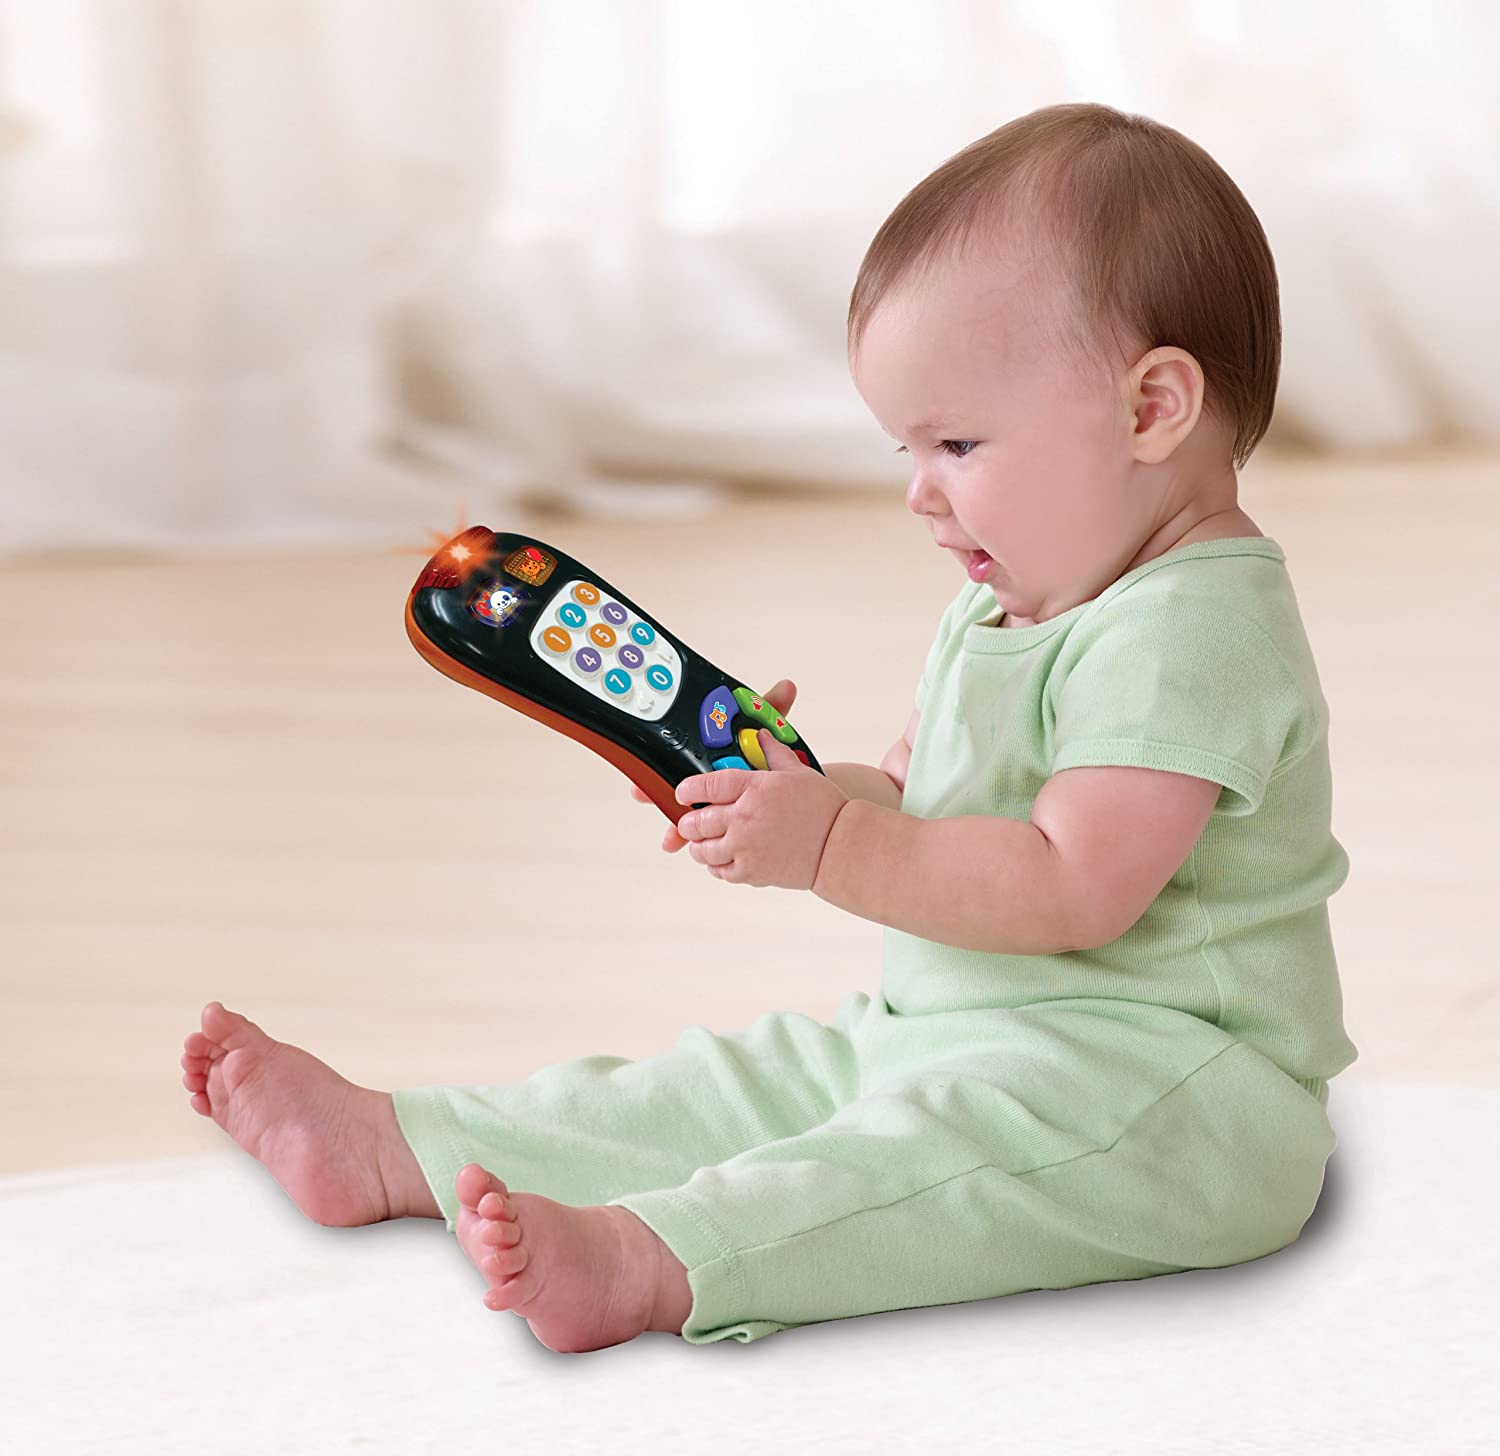 VTech Click and Count Remote, Black - for Ages 6 to 36 Months